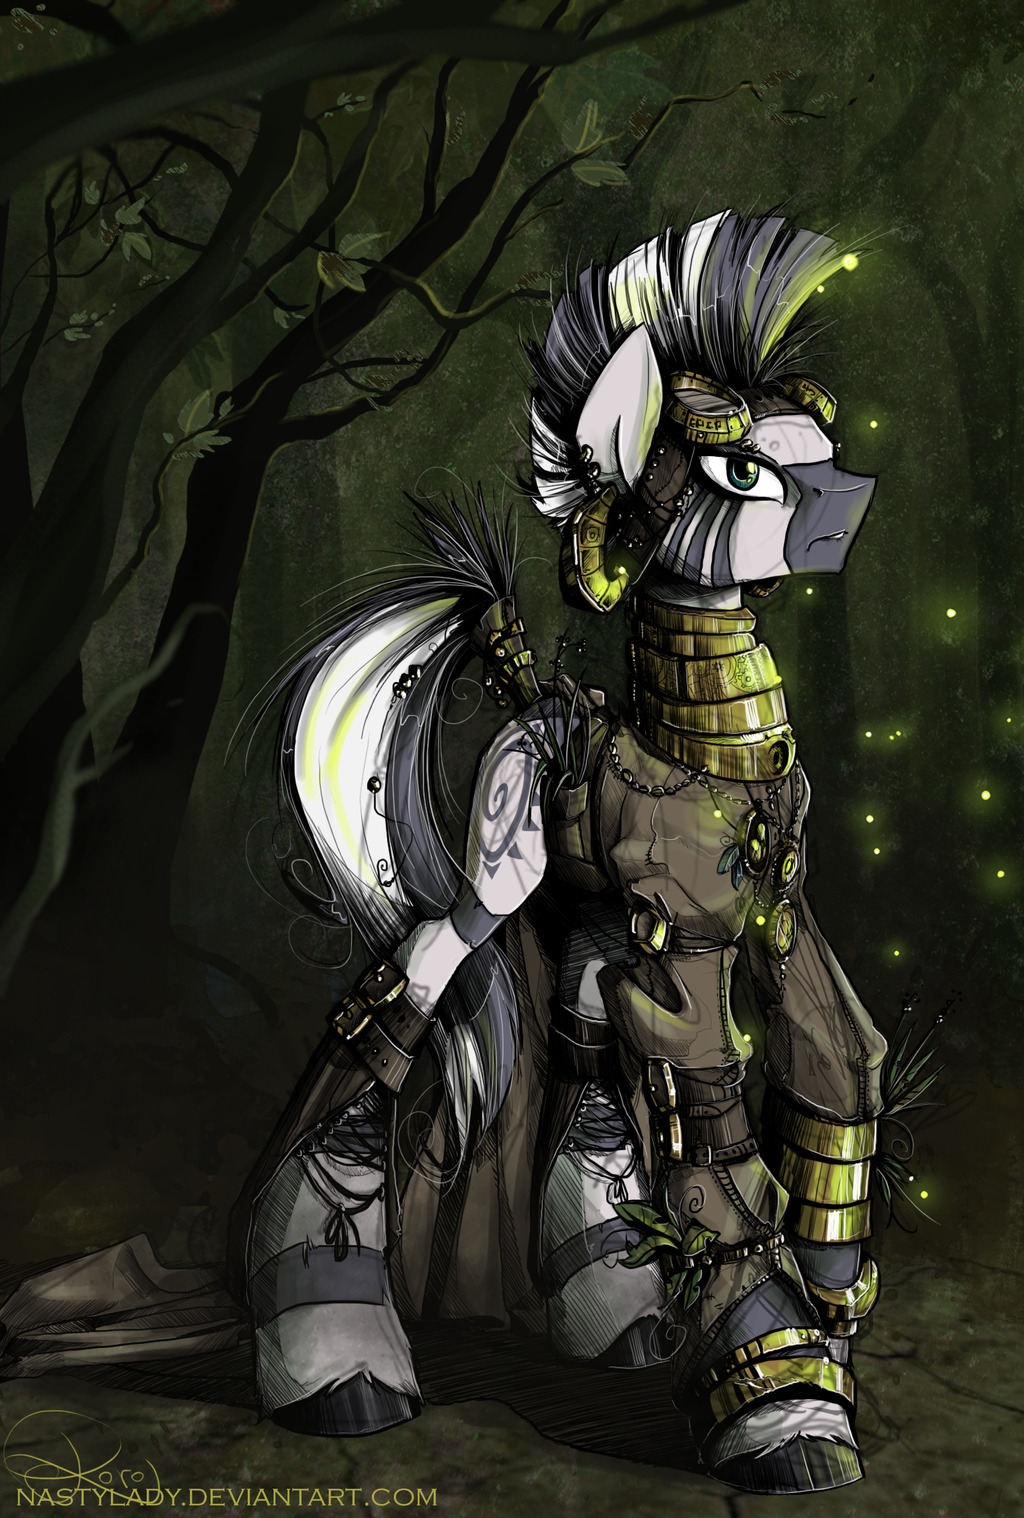 theponyartcollection:

Trees, Gears and Fireflies by *NastyLady
